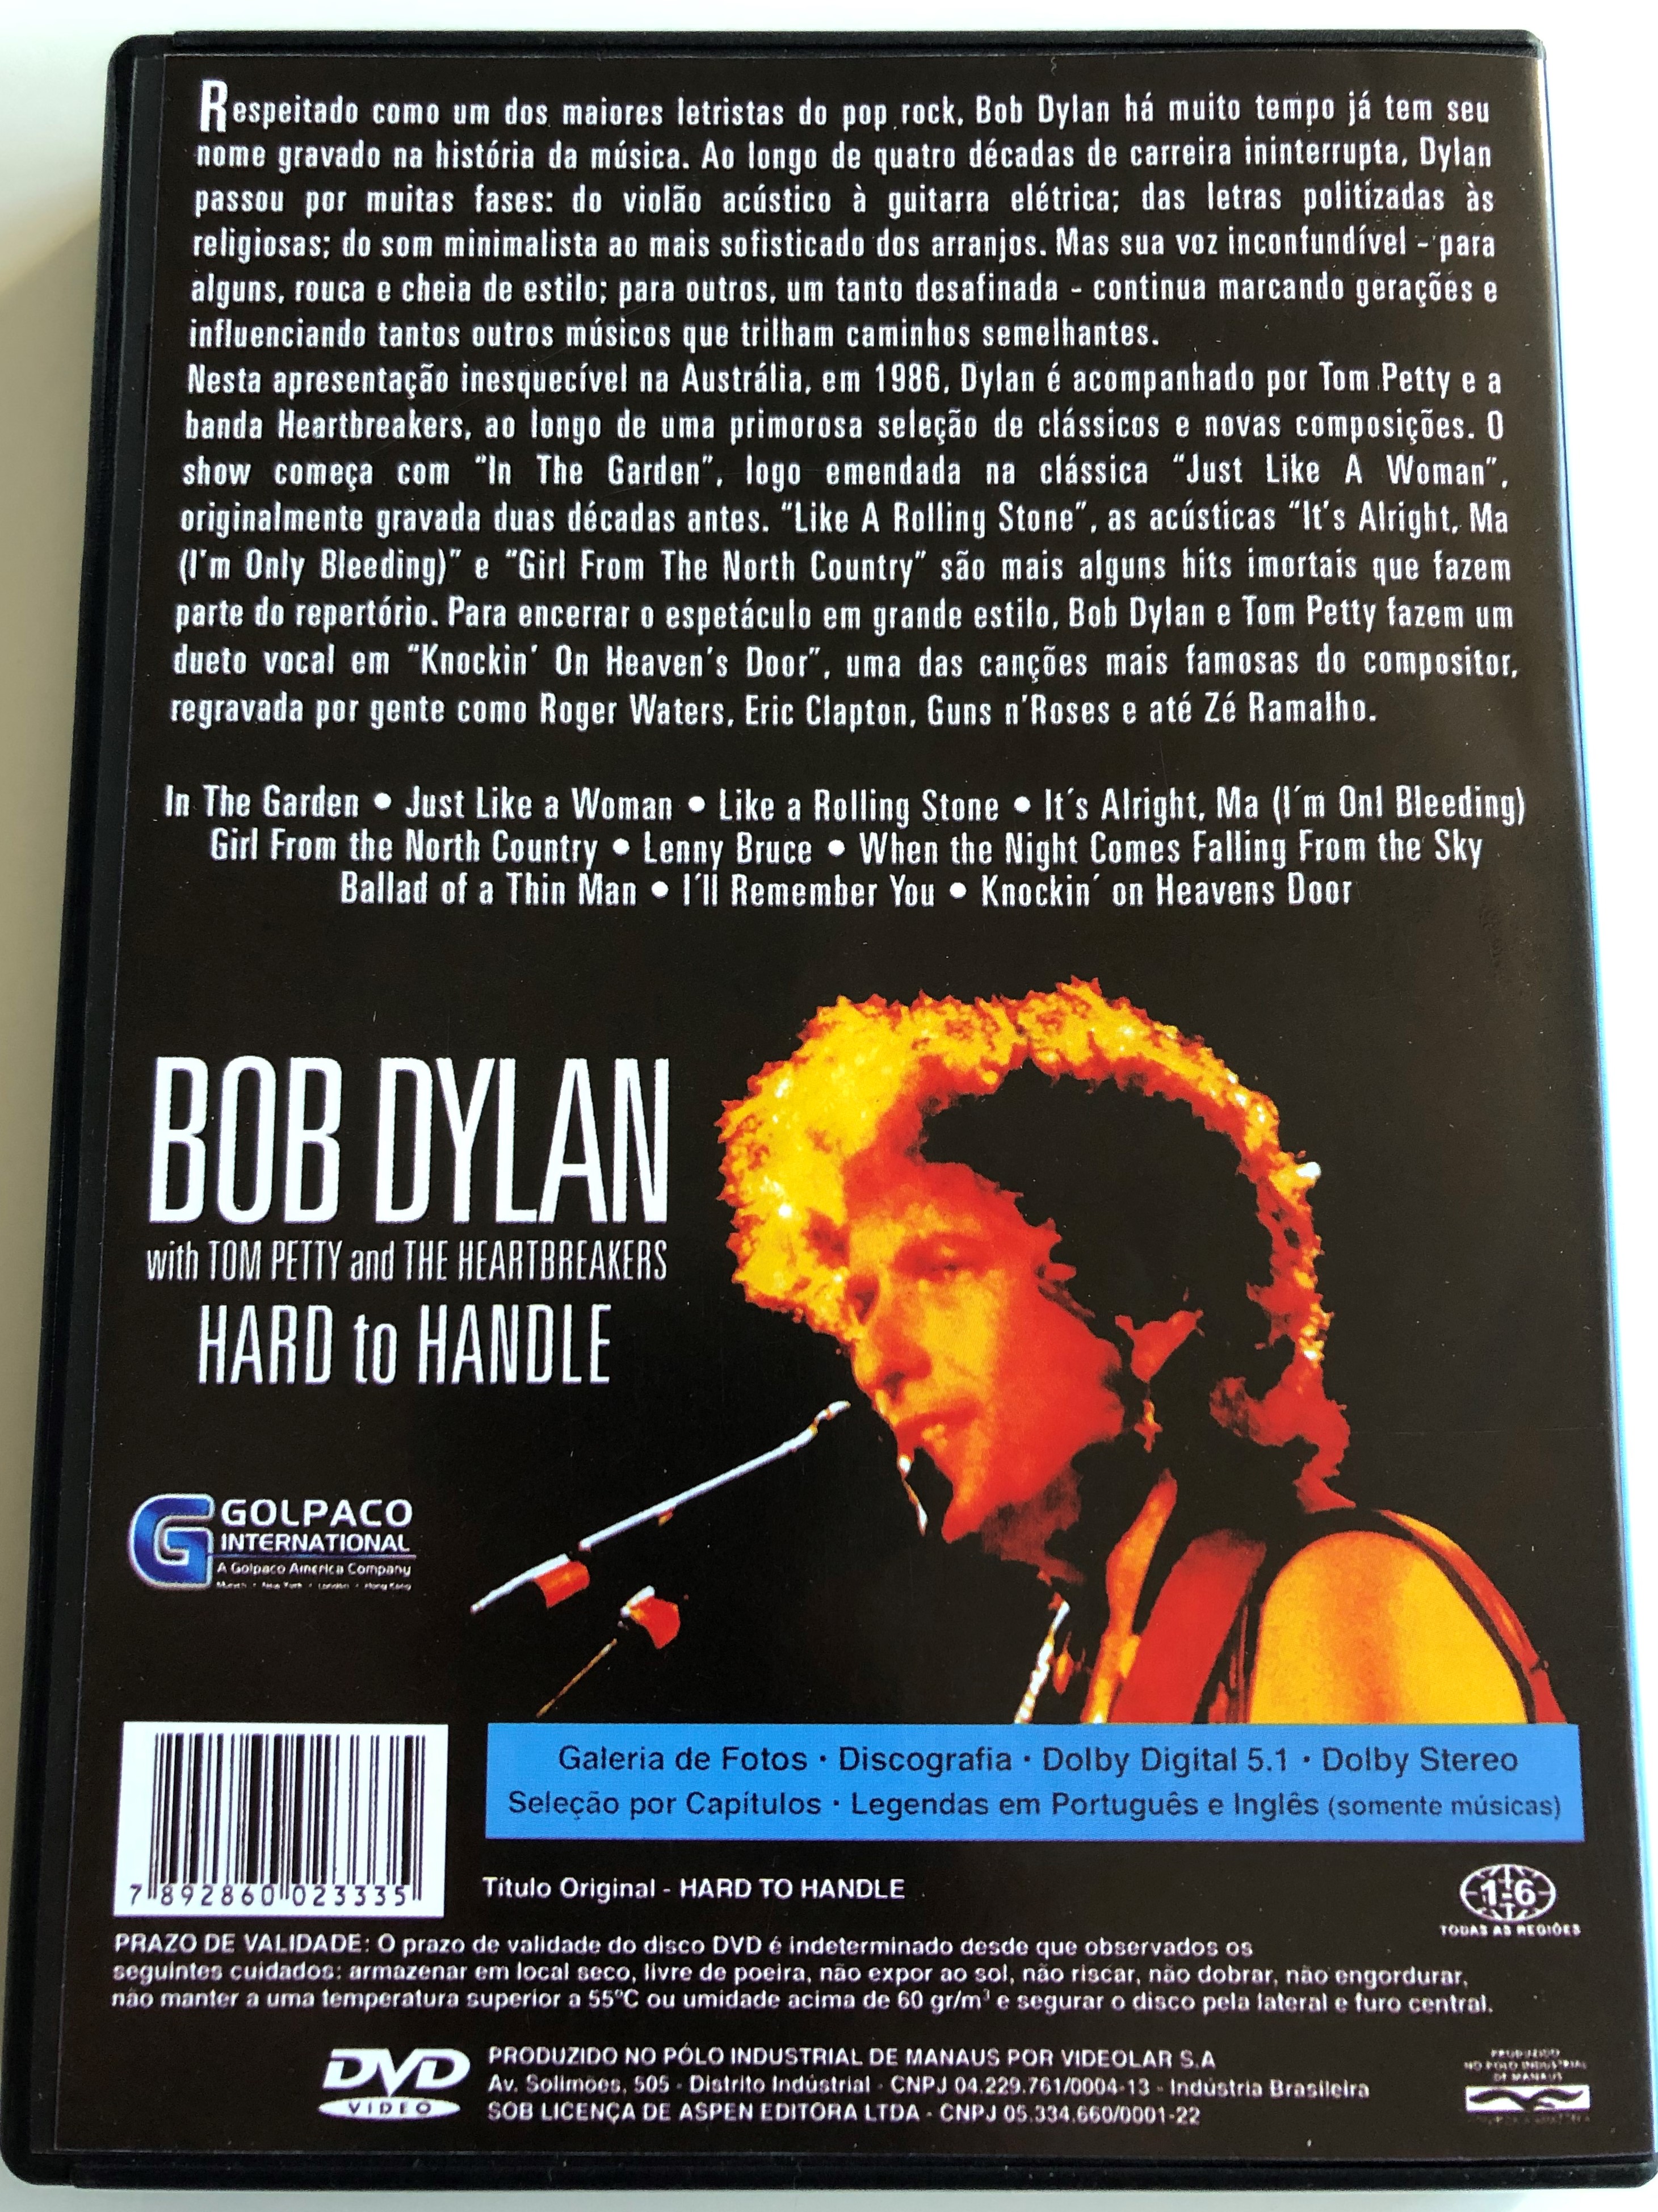 hard-to-handle-dvd-bob-dylan-with-tom-petty-and-the-heartbreakers-3.jpg